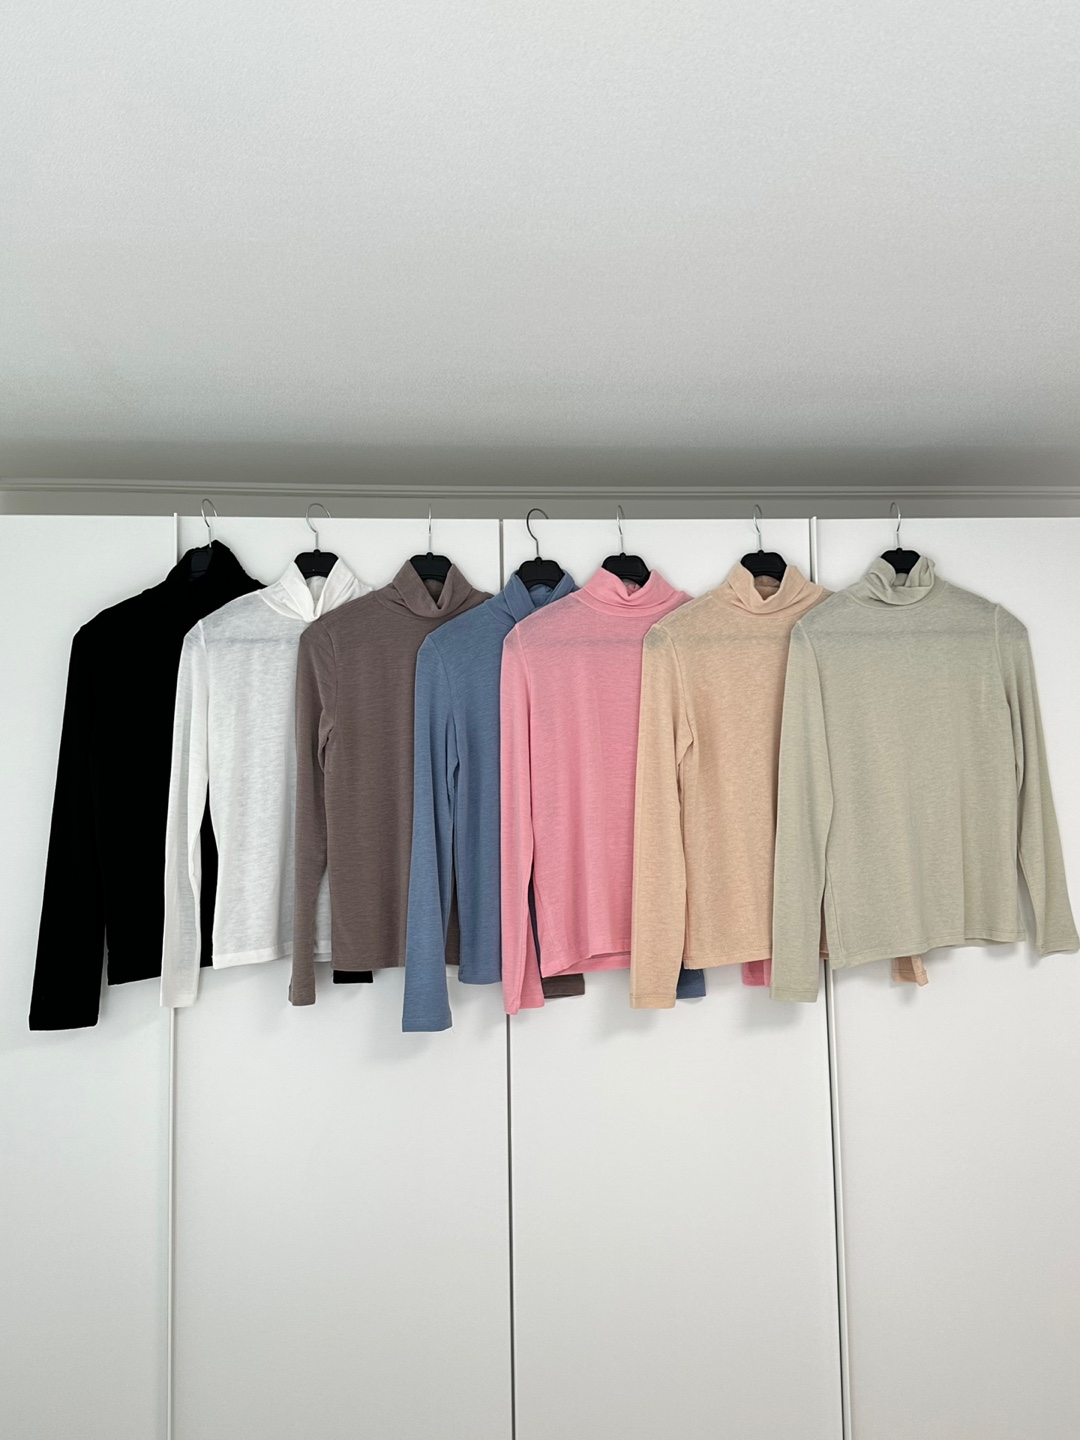 New select) pastel tone high neck neck polar sleeve top 1+1 (White/Butter/Blue/Pink/Lime/Brown/Black)